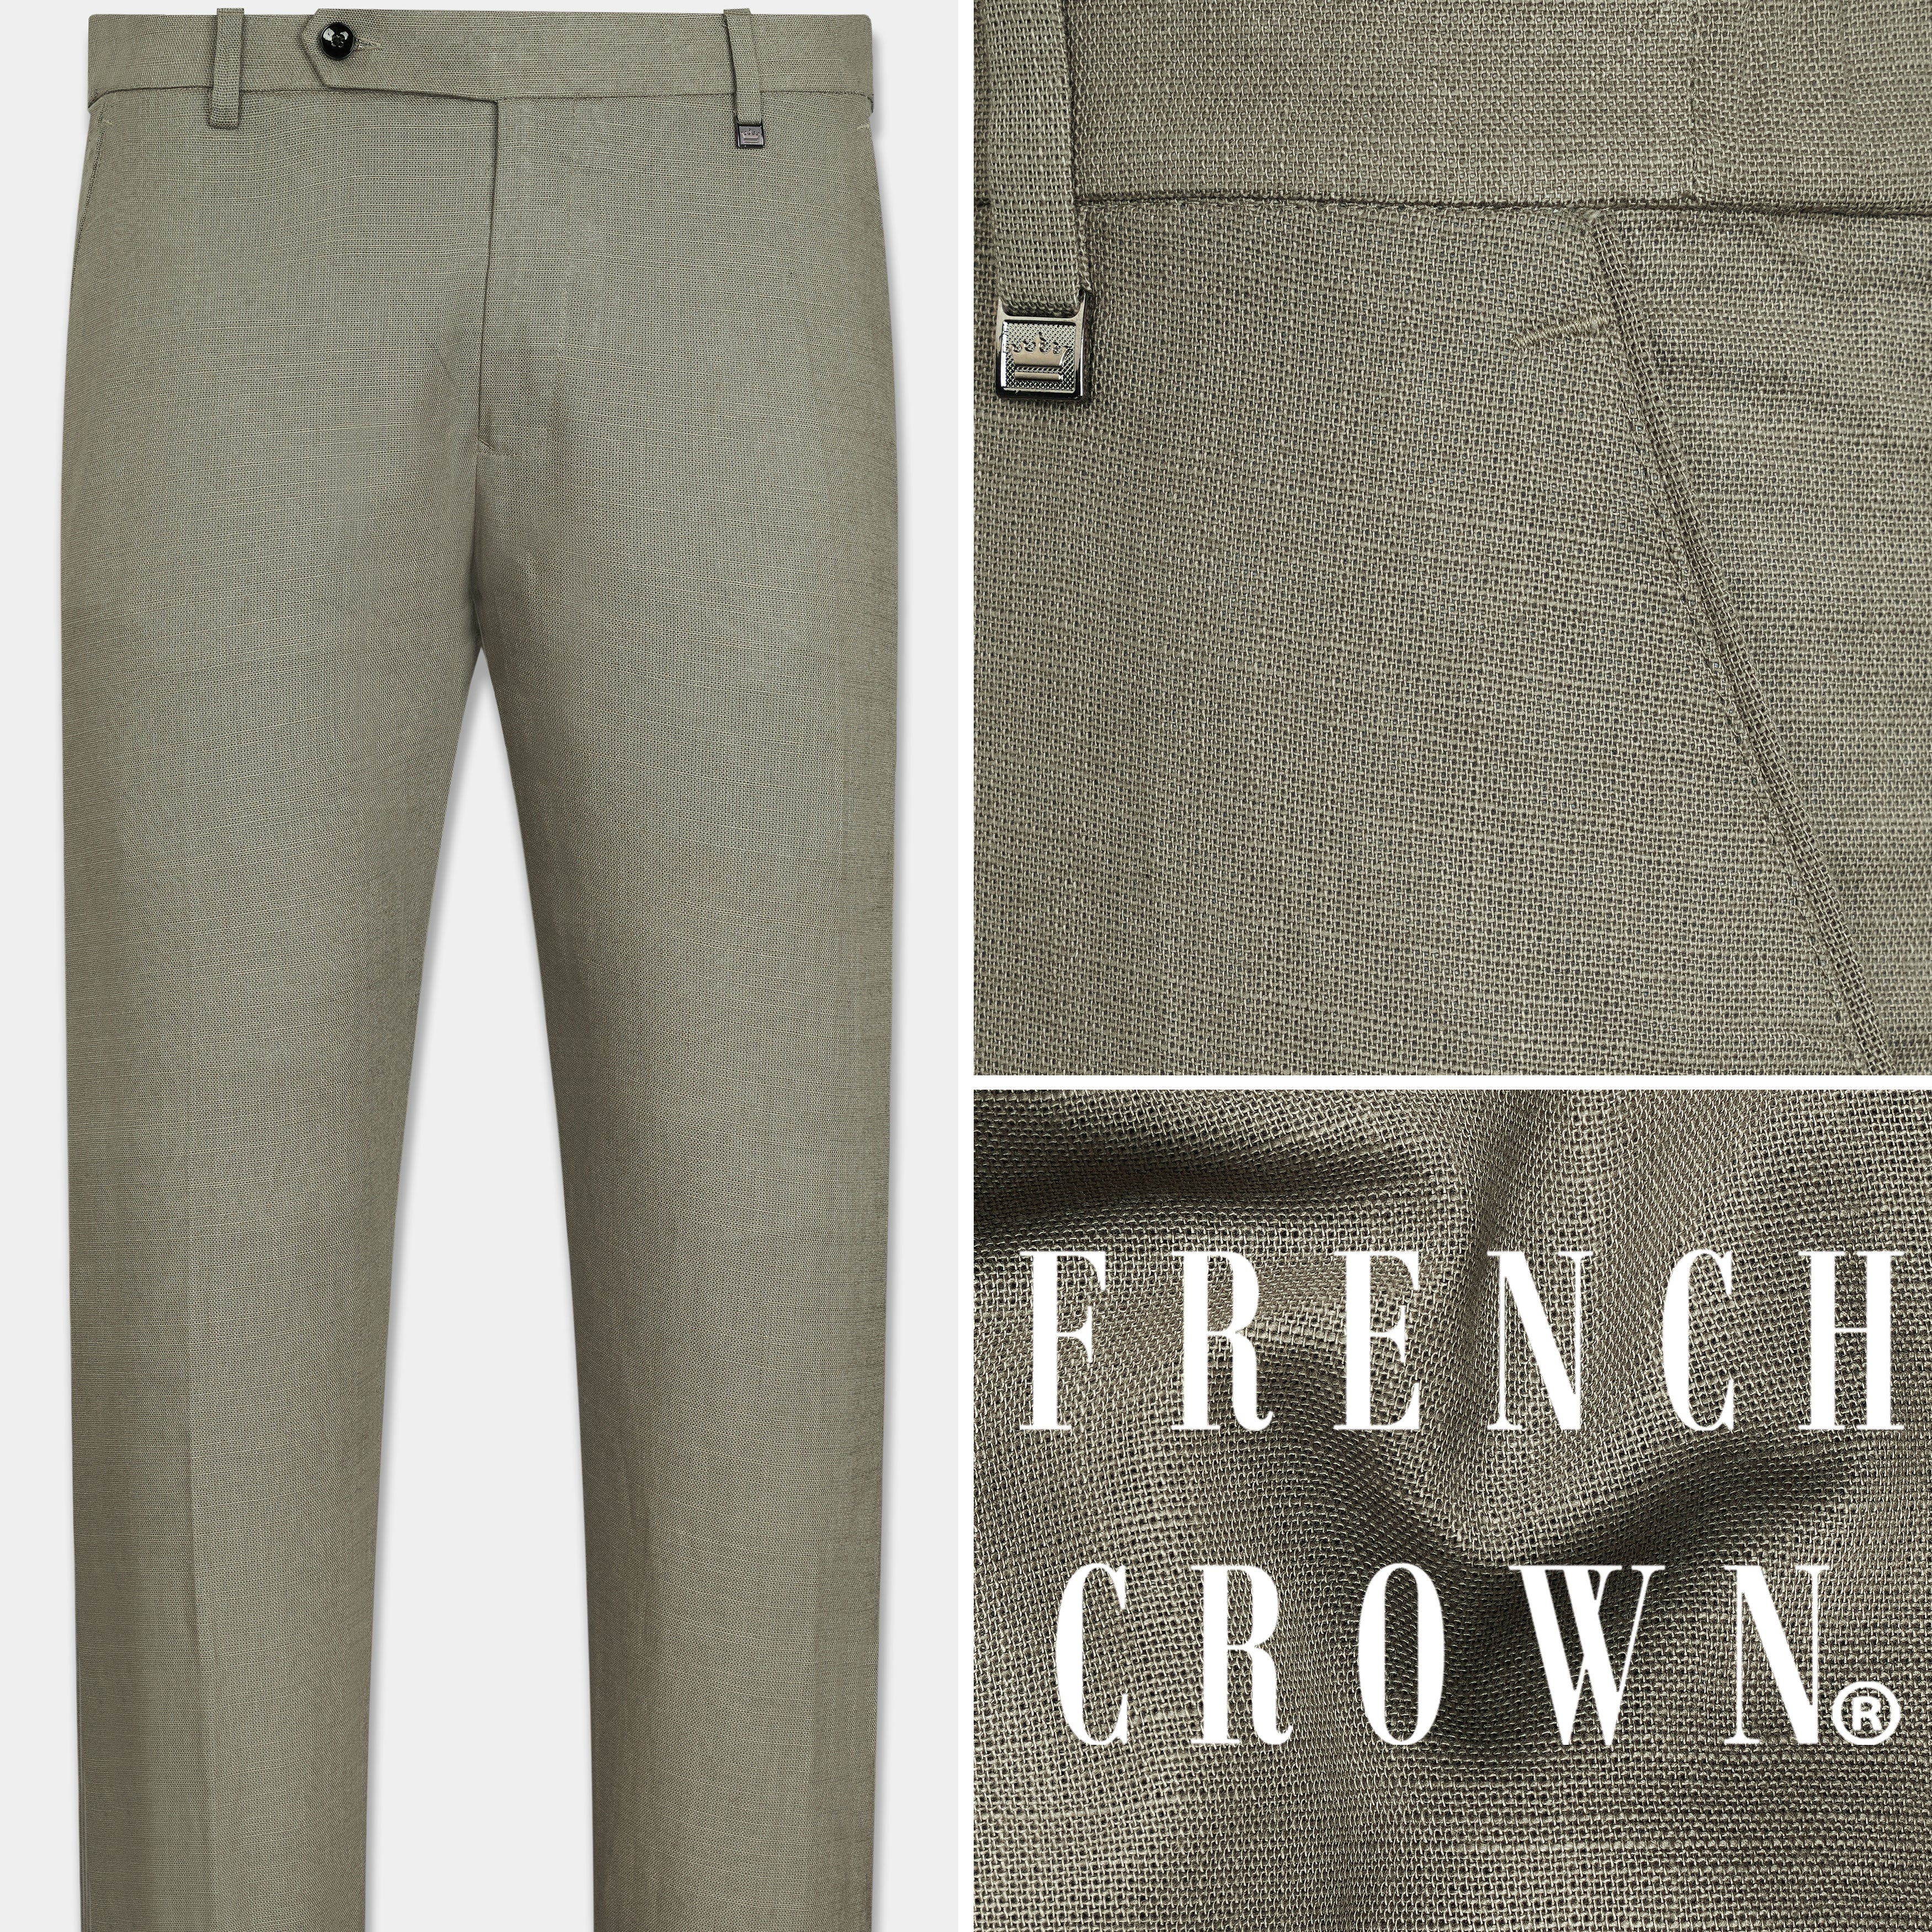 French Crown Navy Textured Dress Pants Size 34 NWT | eBay